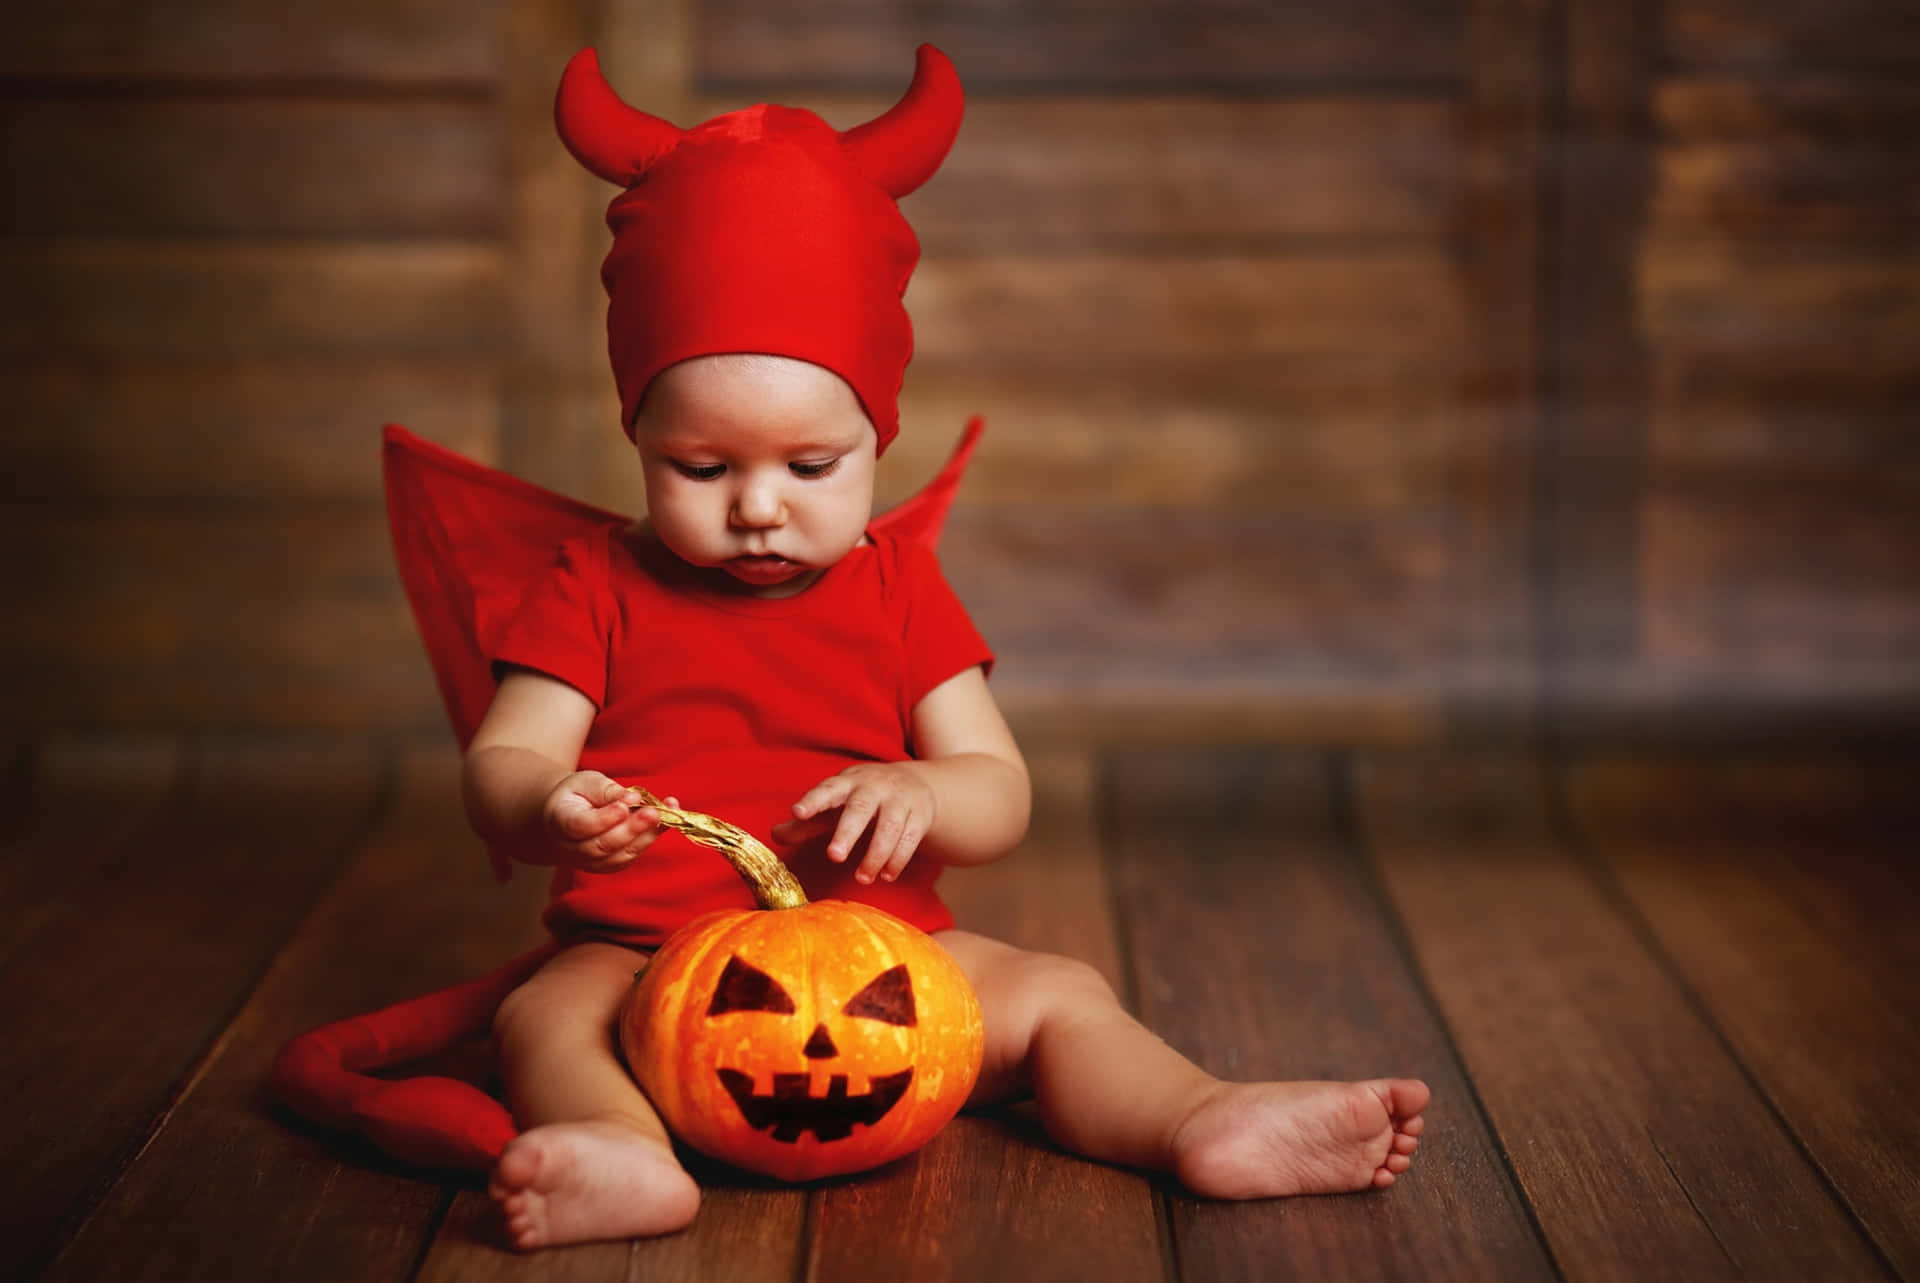 A Baby Dressed As A Devil With A Pumpkin